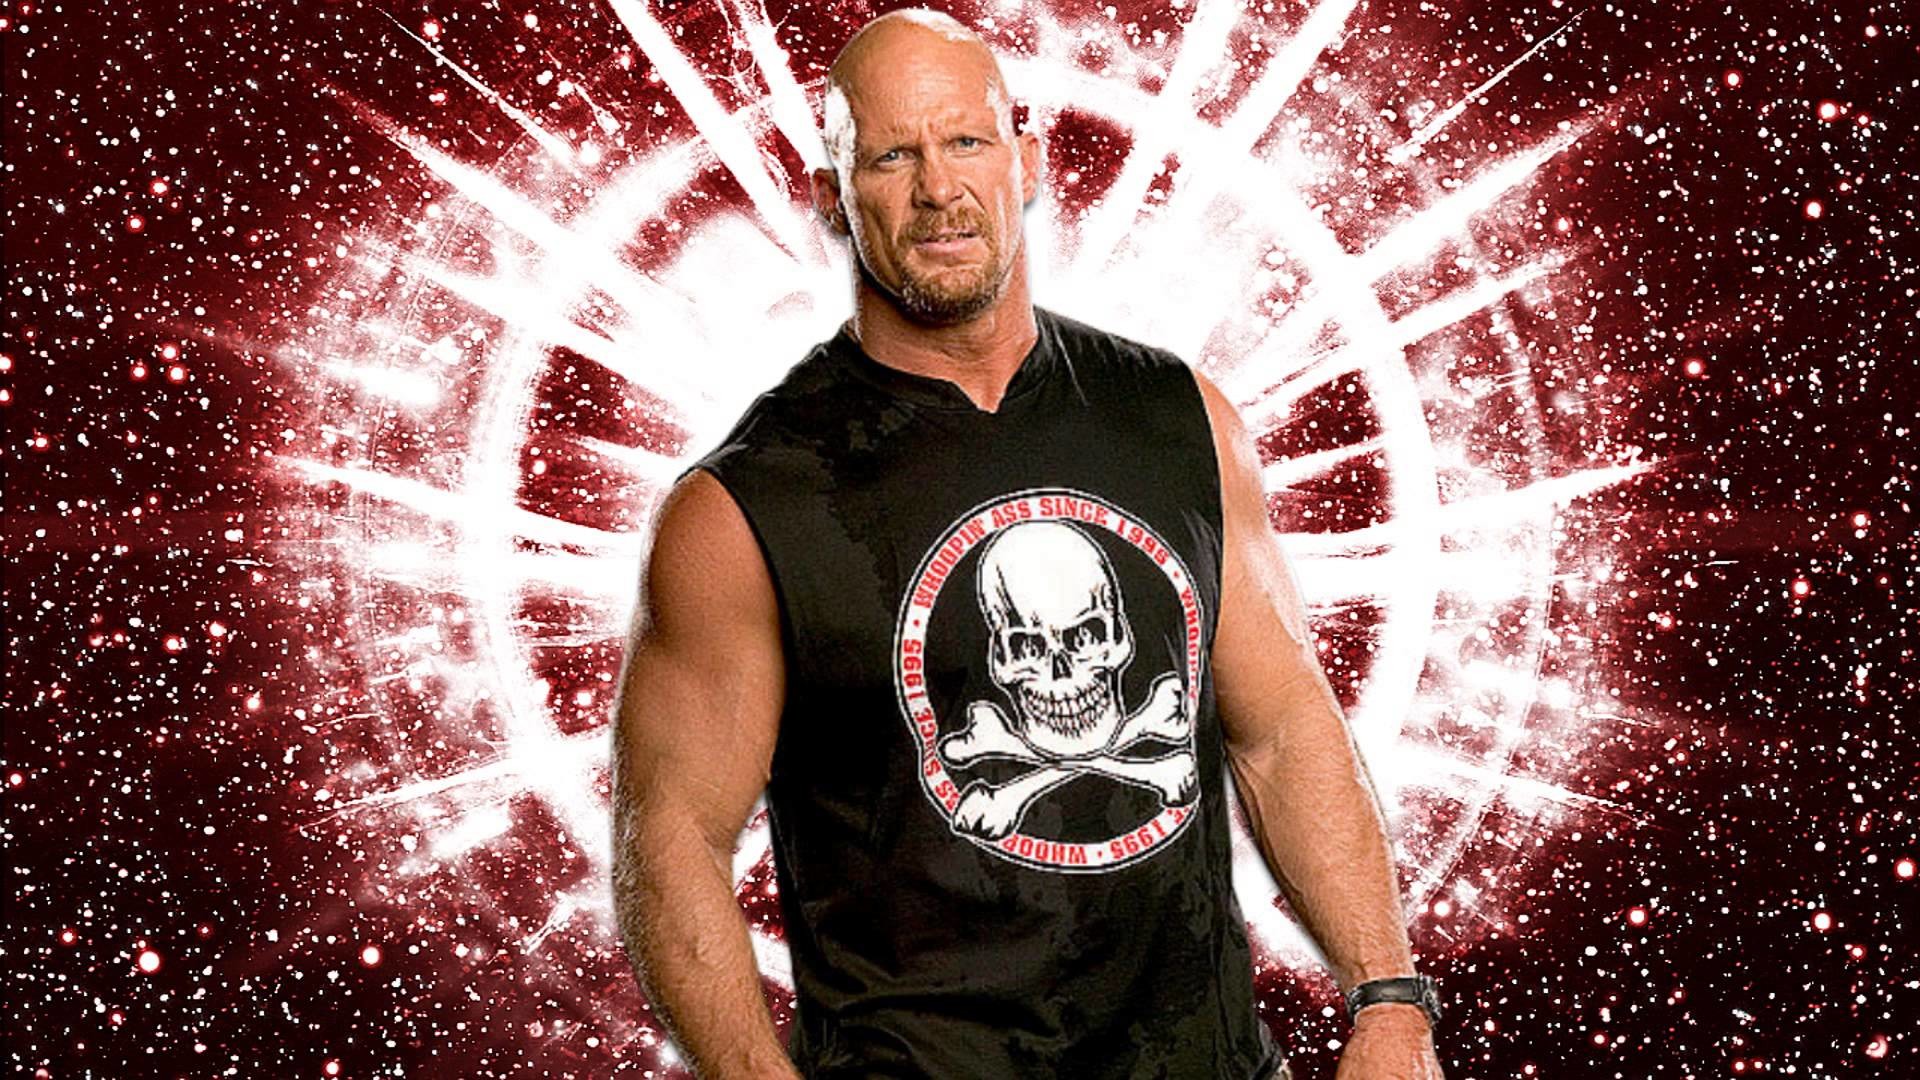 1996 1998 Stone Cold Steve Austin 3rd WWE Theme Song – Hell Frozen Over